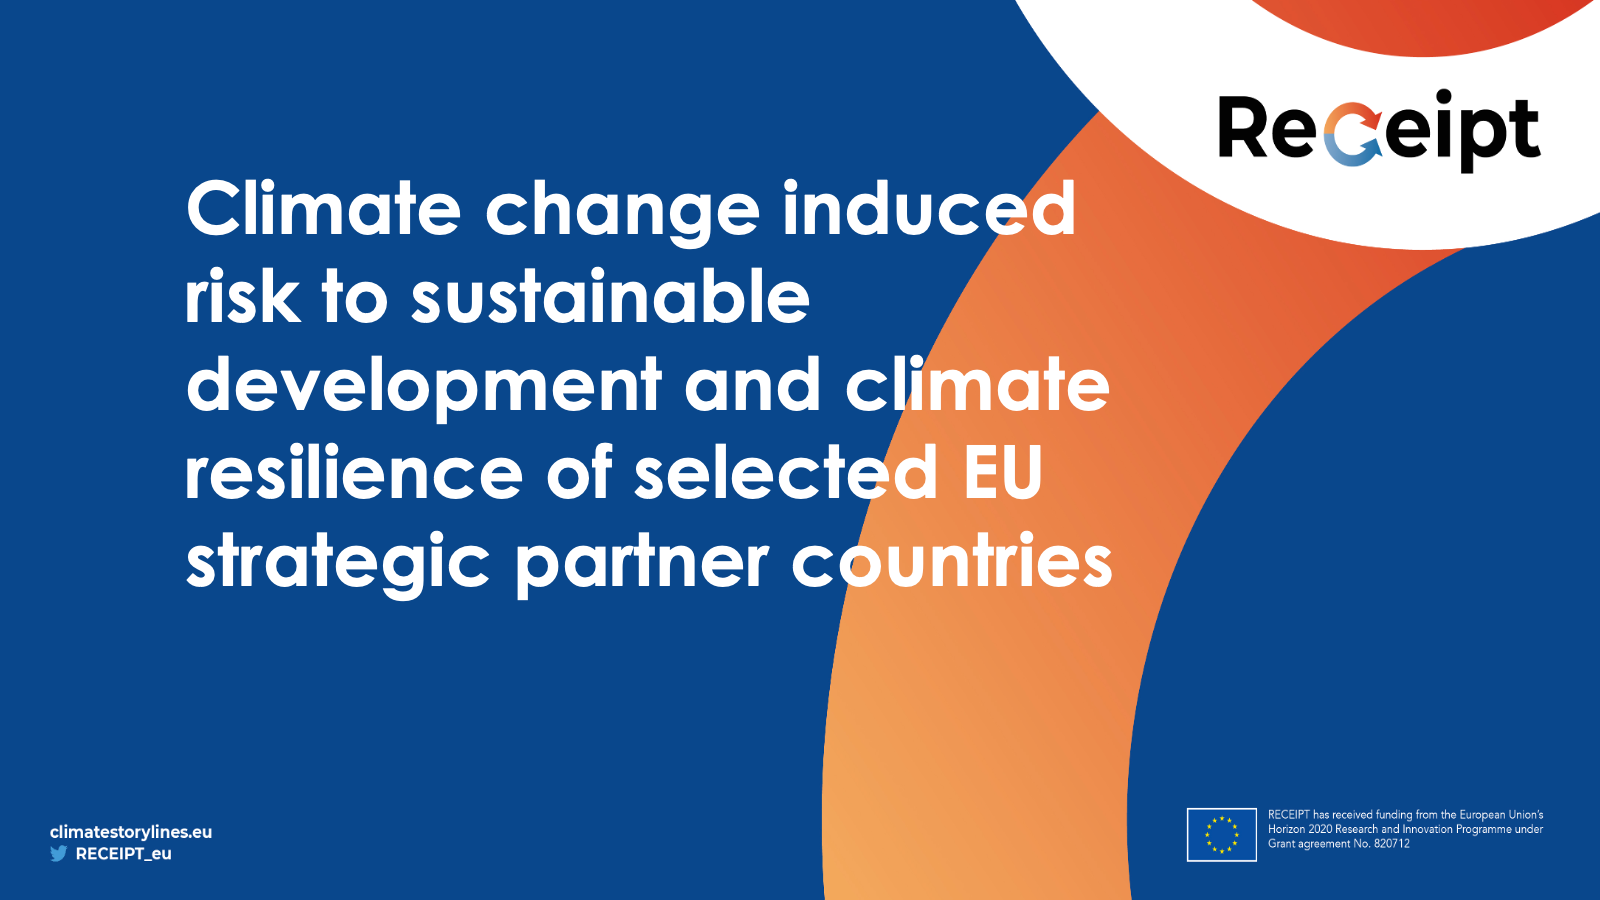 D5.1 – Climate change induced risk to sustainable development and climate resilience of selected EU strategic partner countries